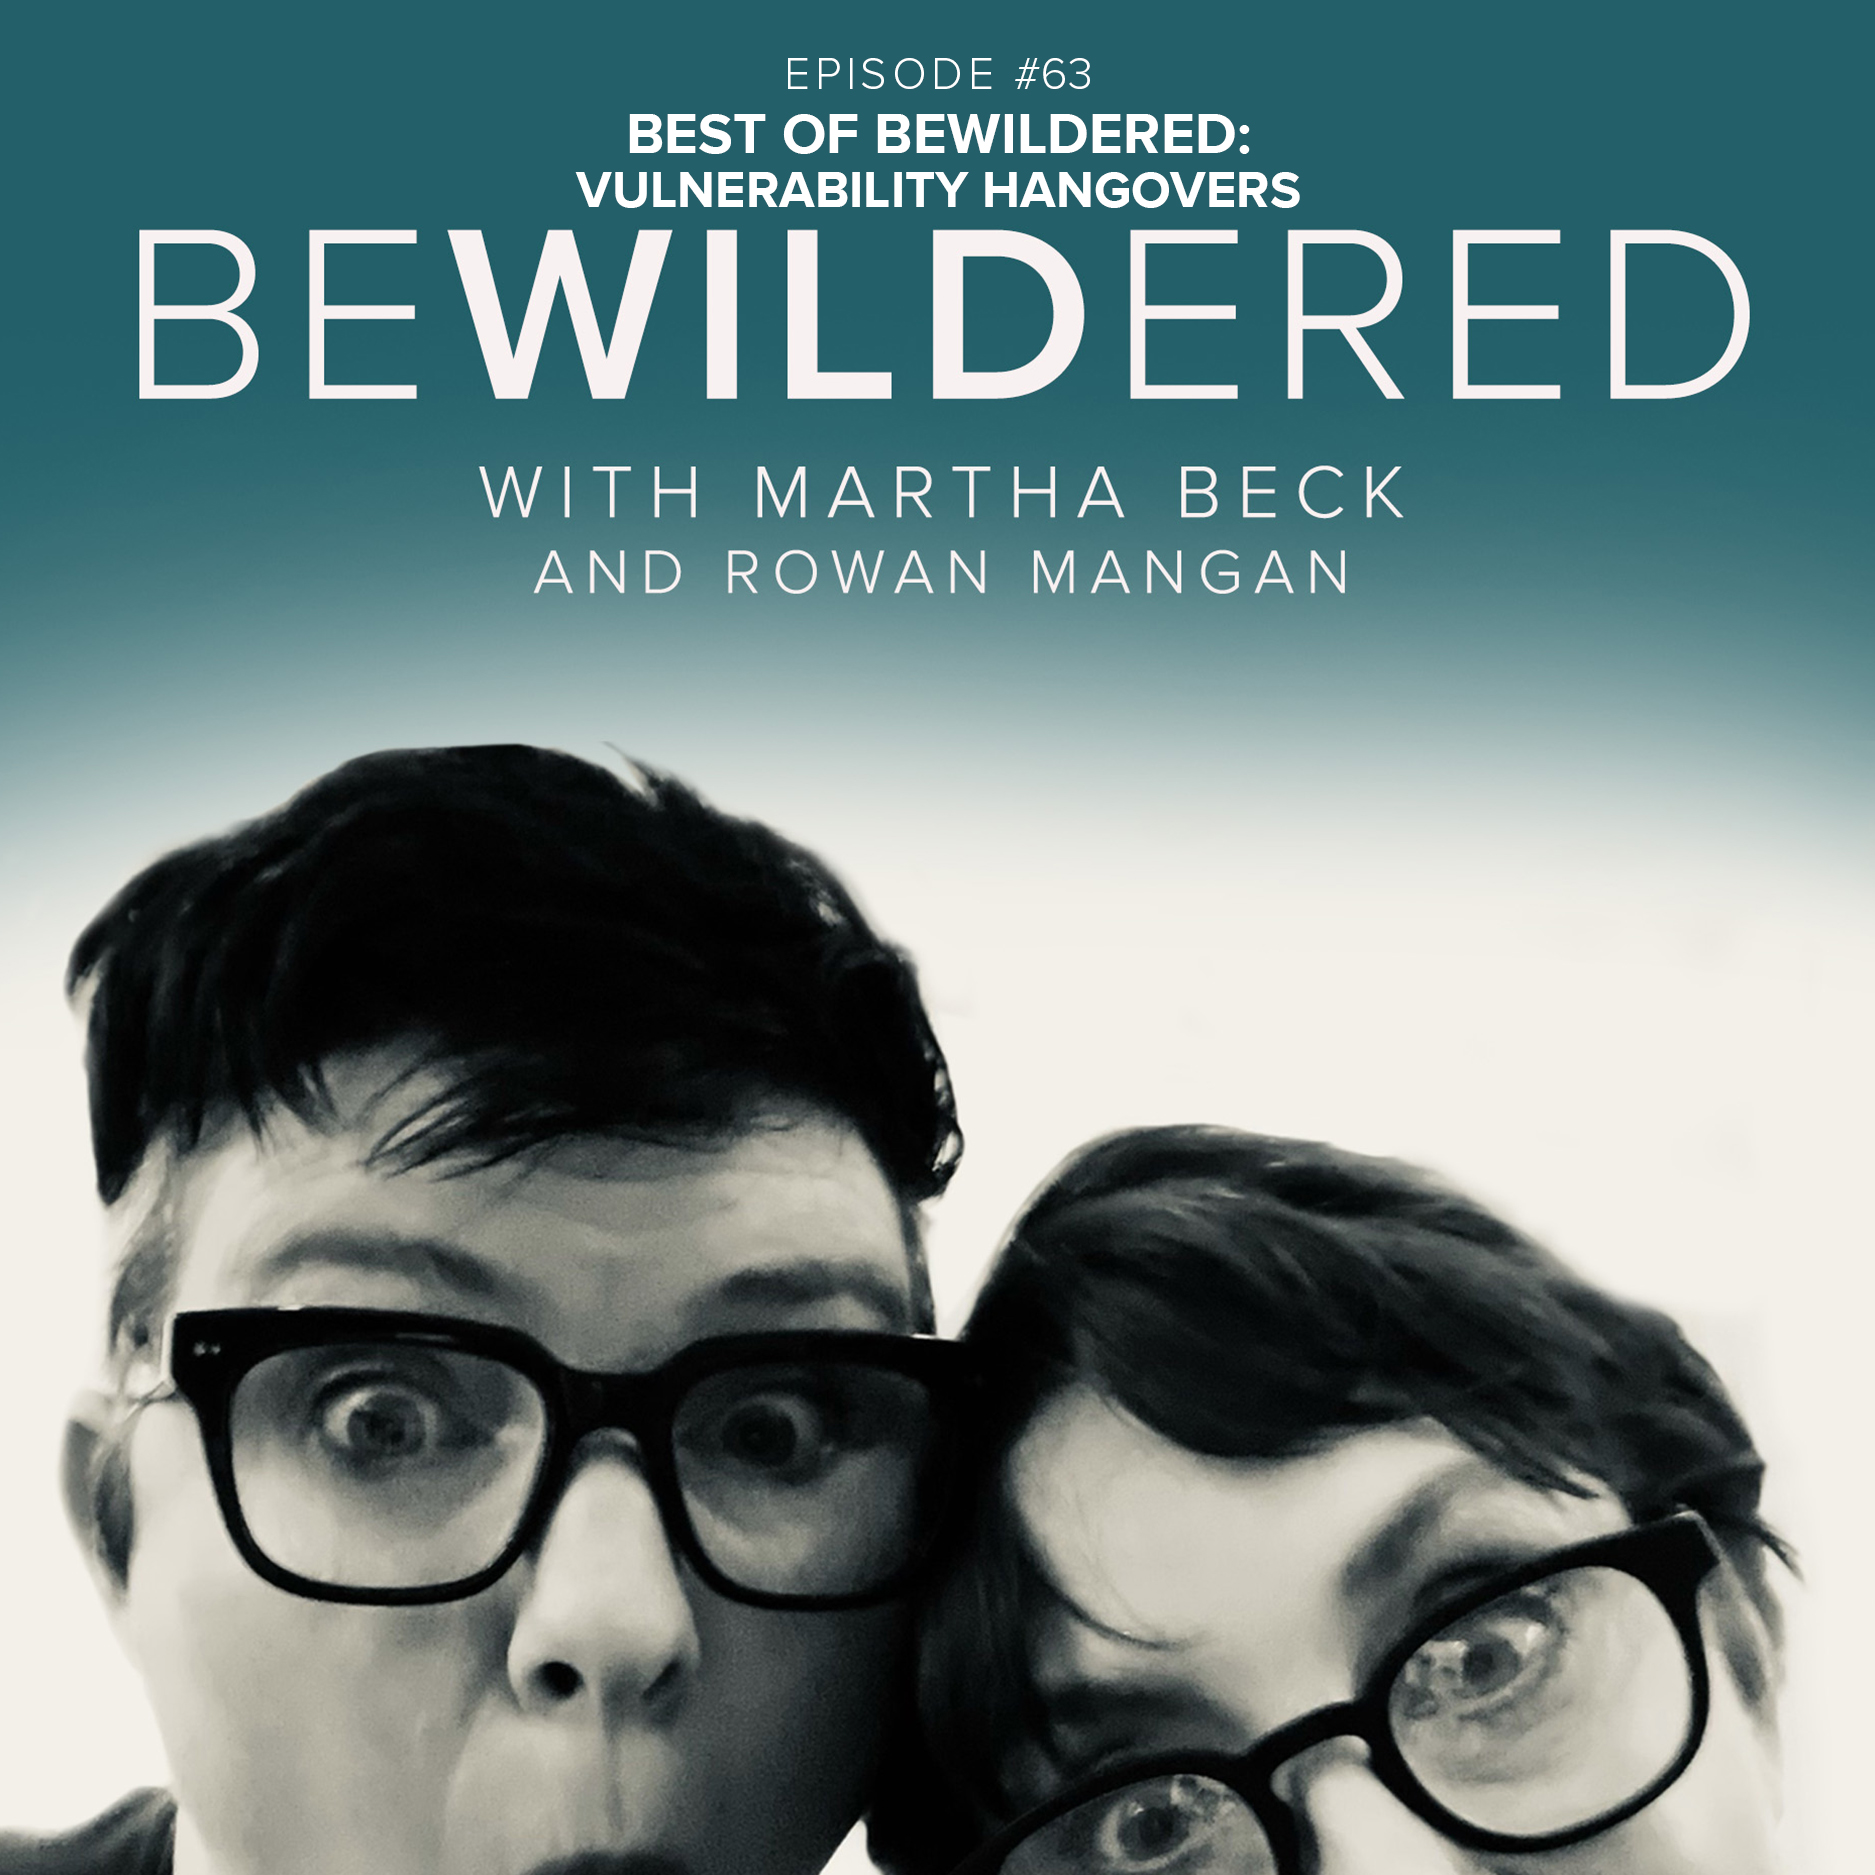 Image for Episode #63 Best of Bewildered: Vulnerability Hangovers for the Bewildered Podcast with Martha Beck and Rowan Mangan